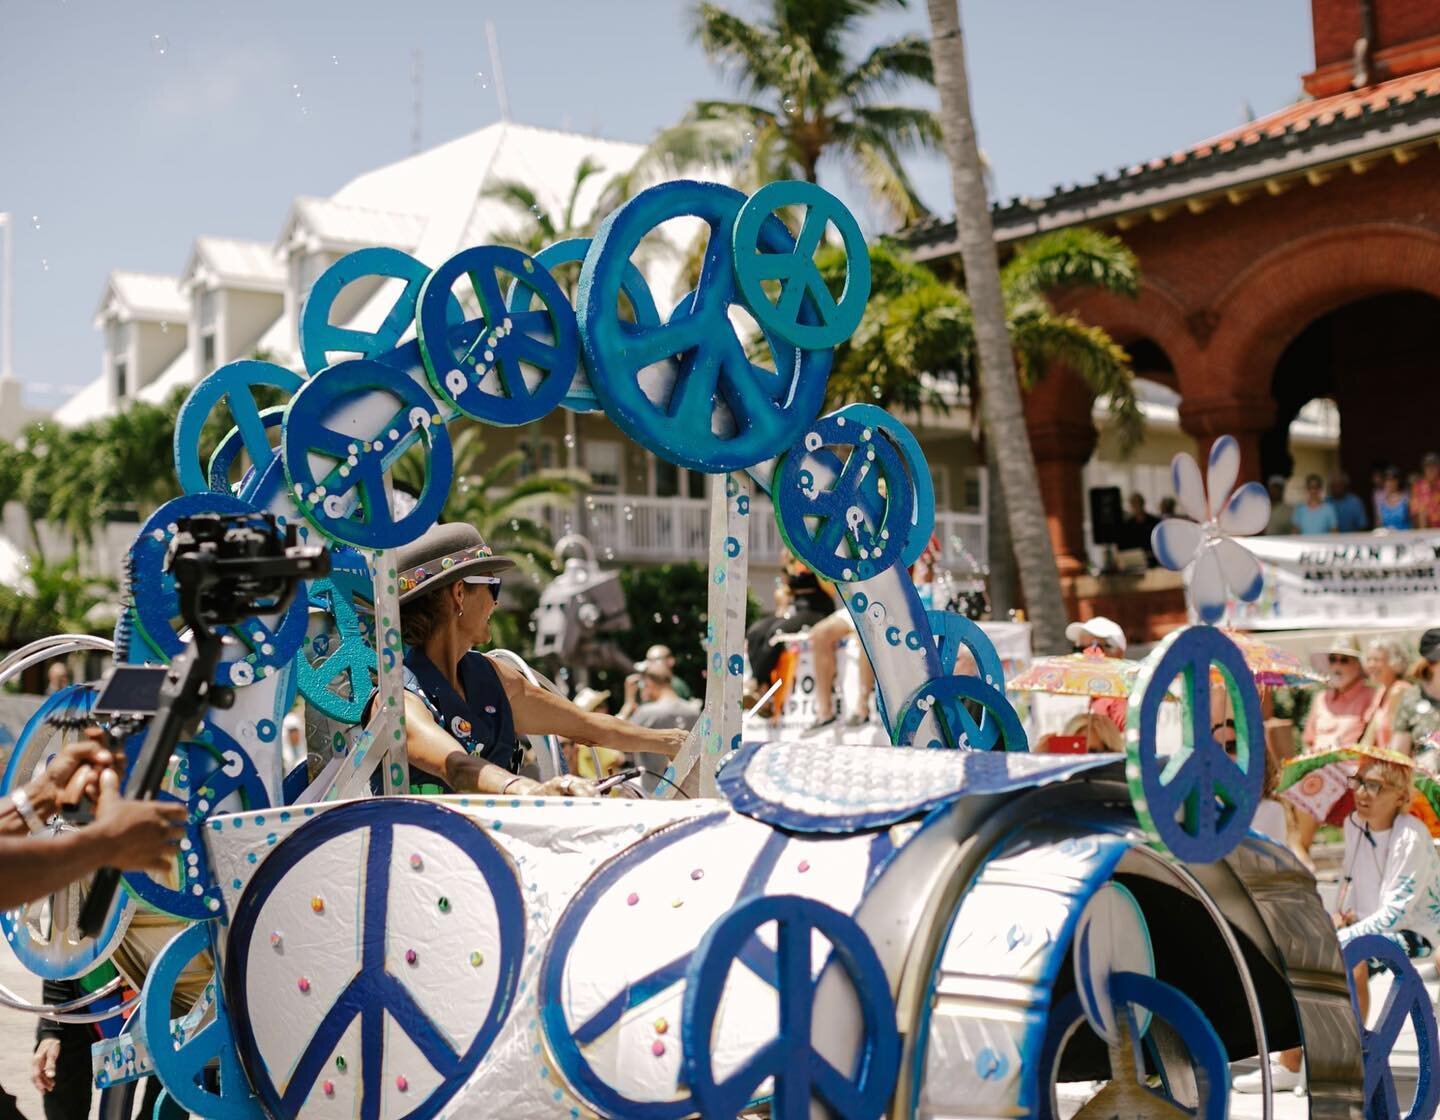 ☮️ PAPIO ☮️
.
The wacky contraptions return to the streets THIS Saturday.
See you at the parade!
.
.
.
.
#keywest #papio #kinetic #sculpture #peace #parade #local #duval #community #family #familyfun #familyfriendly #visitkeywest